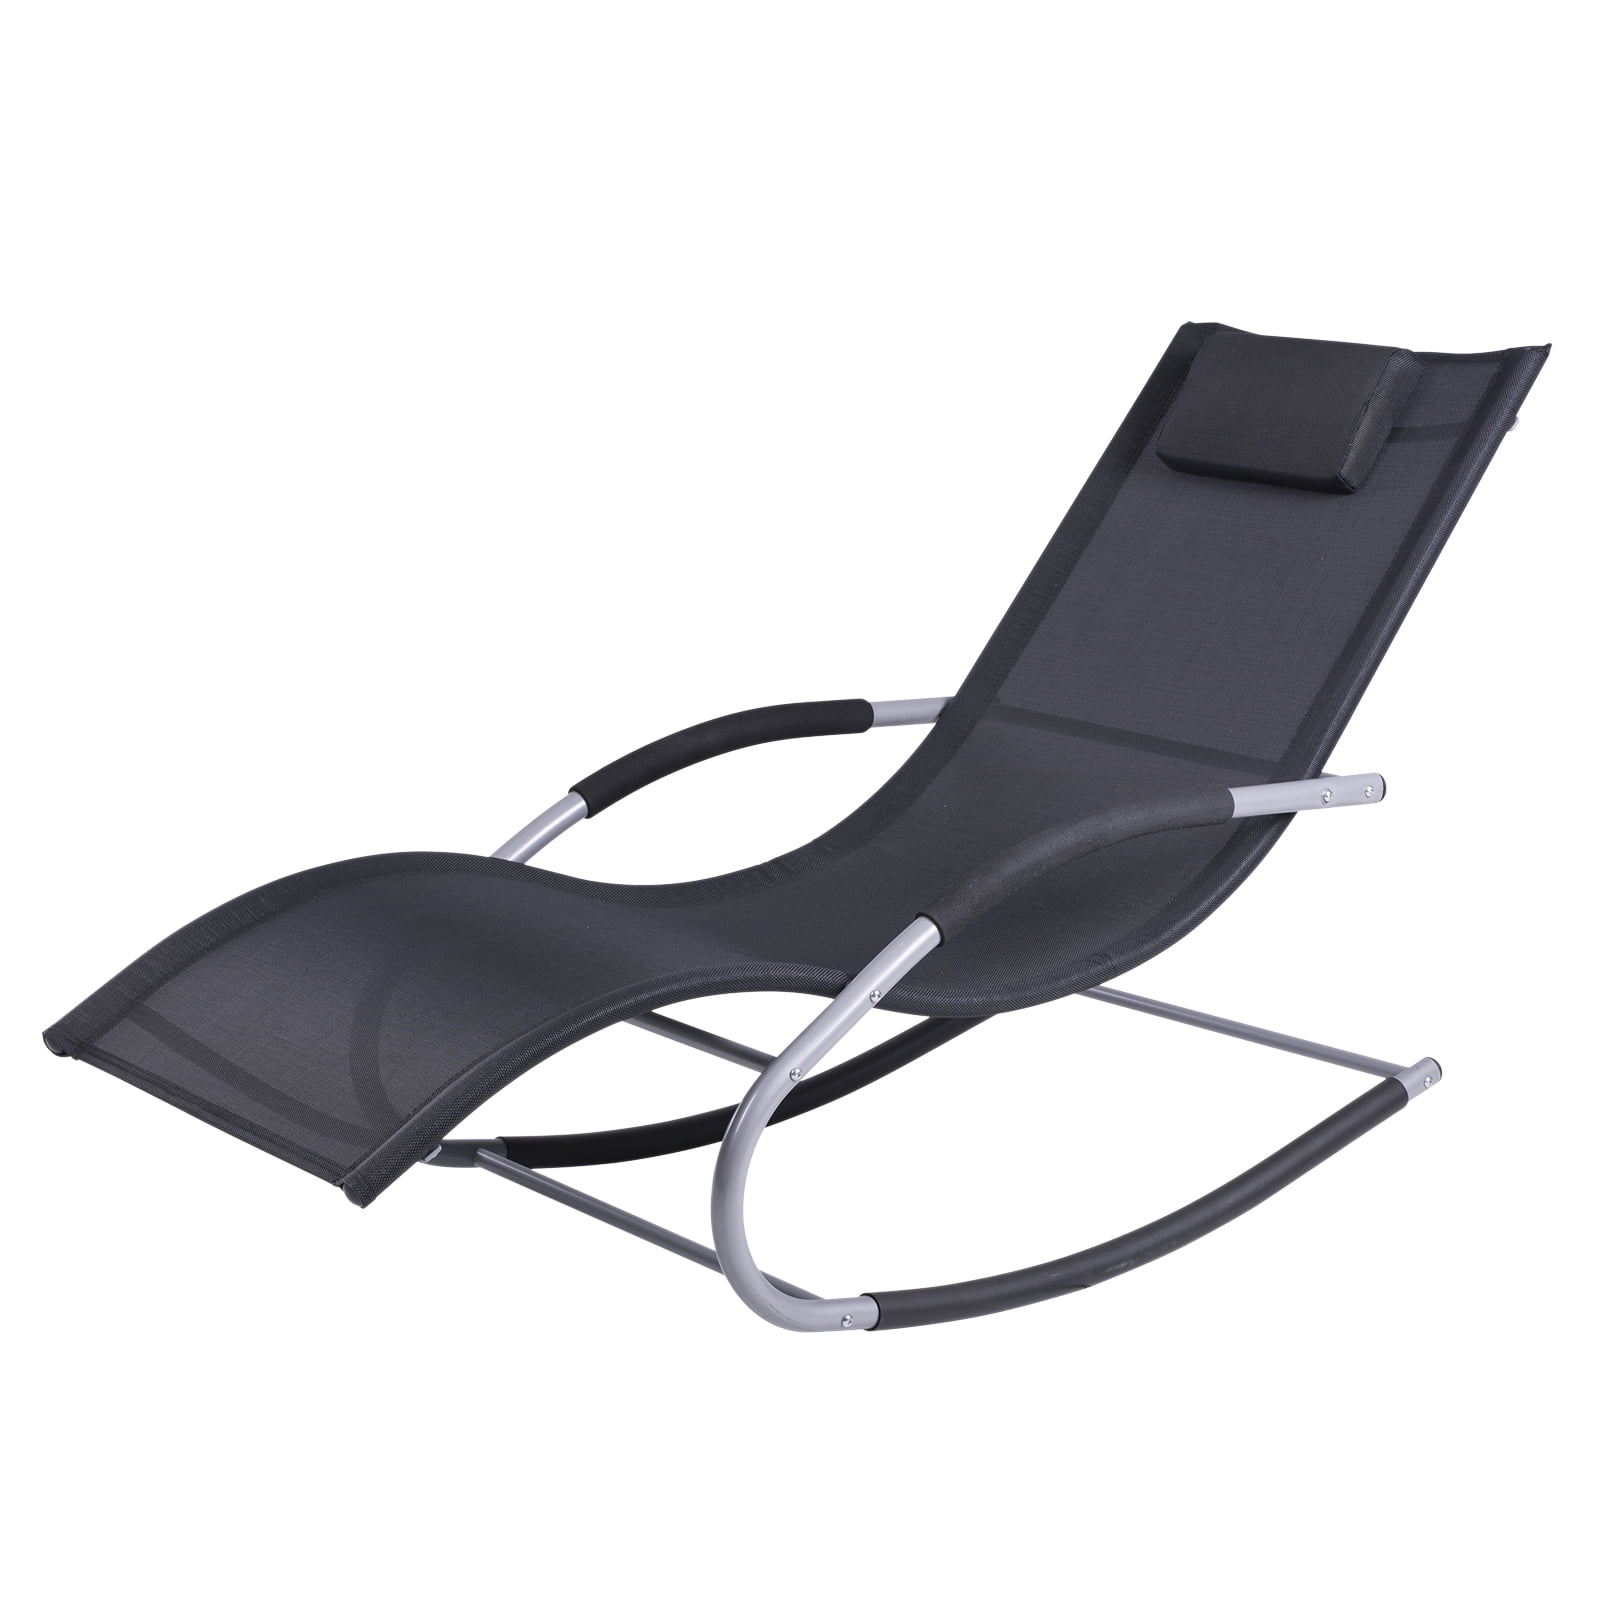 Outsunny Chaise Rocker Patio Lounge Chairs with Recliner w/ Detachable Pillow & Durable Weather-Fighting Fabric, Black